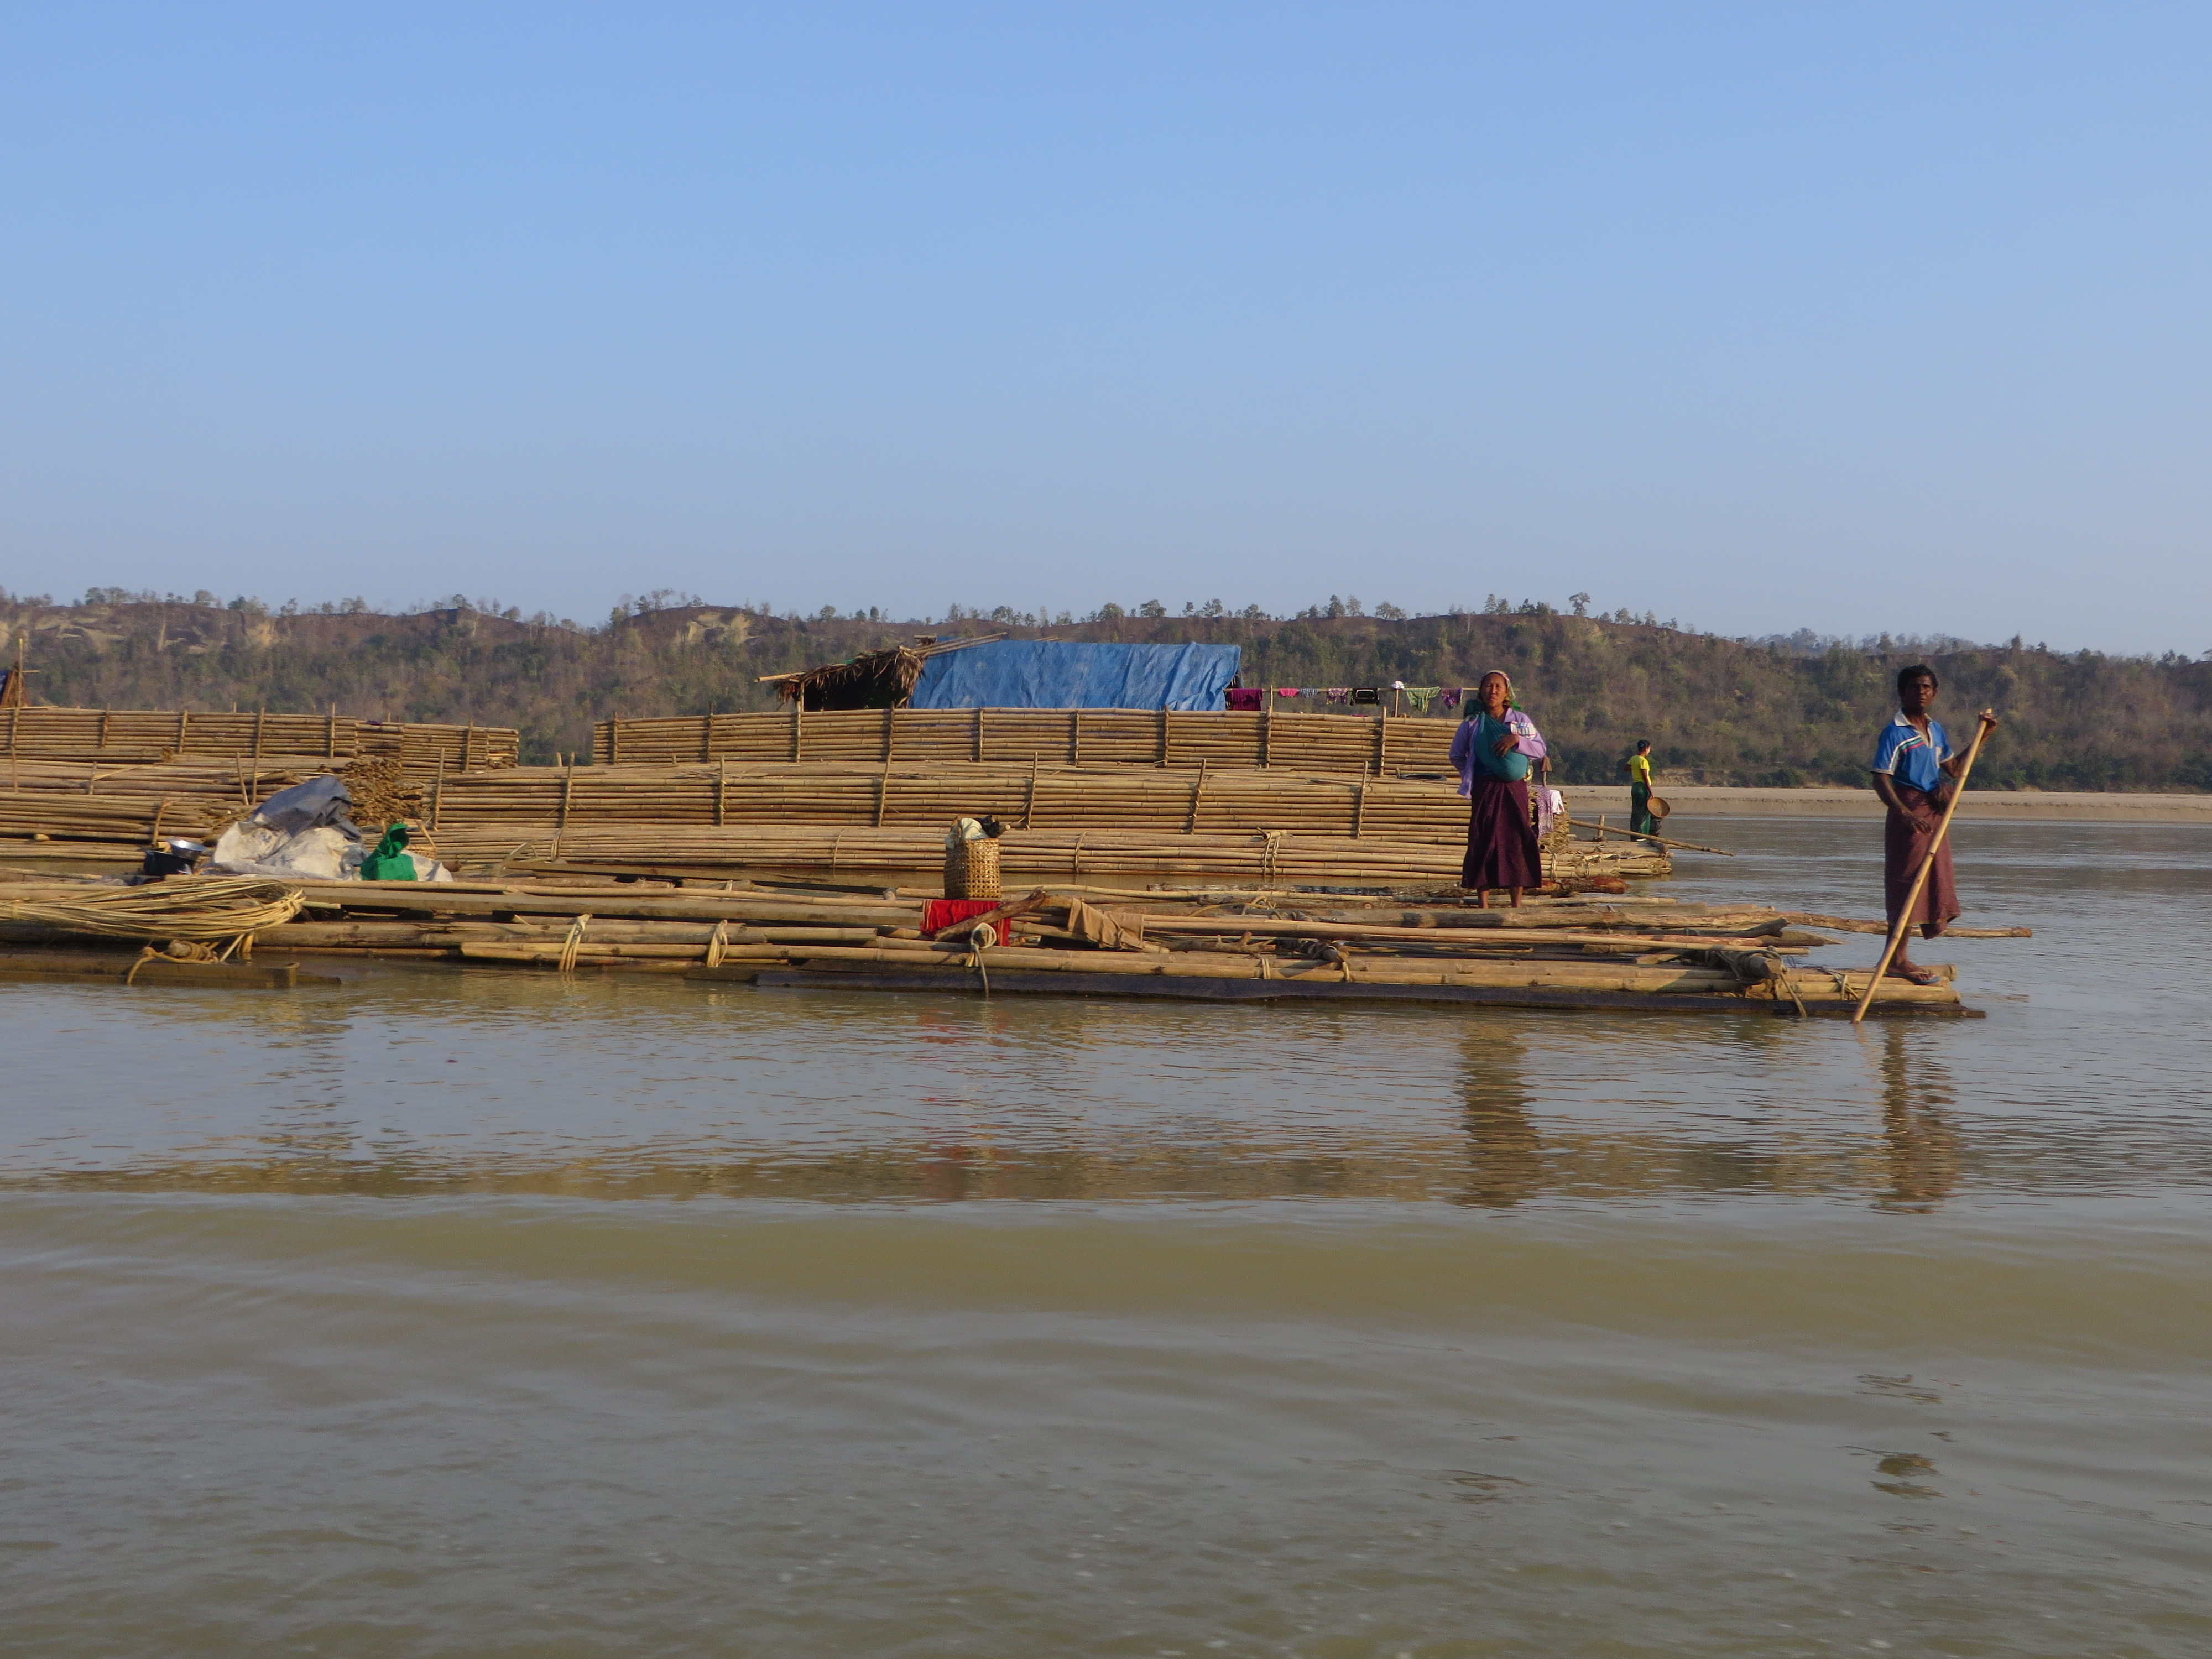 Who needs an office job when you can spend the week sitting on a bamboo raft?